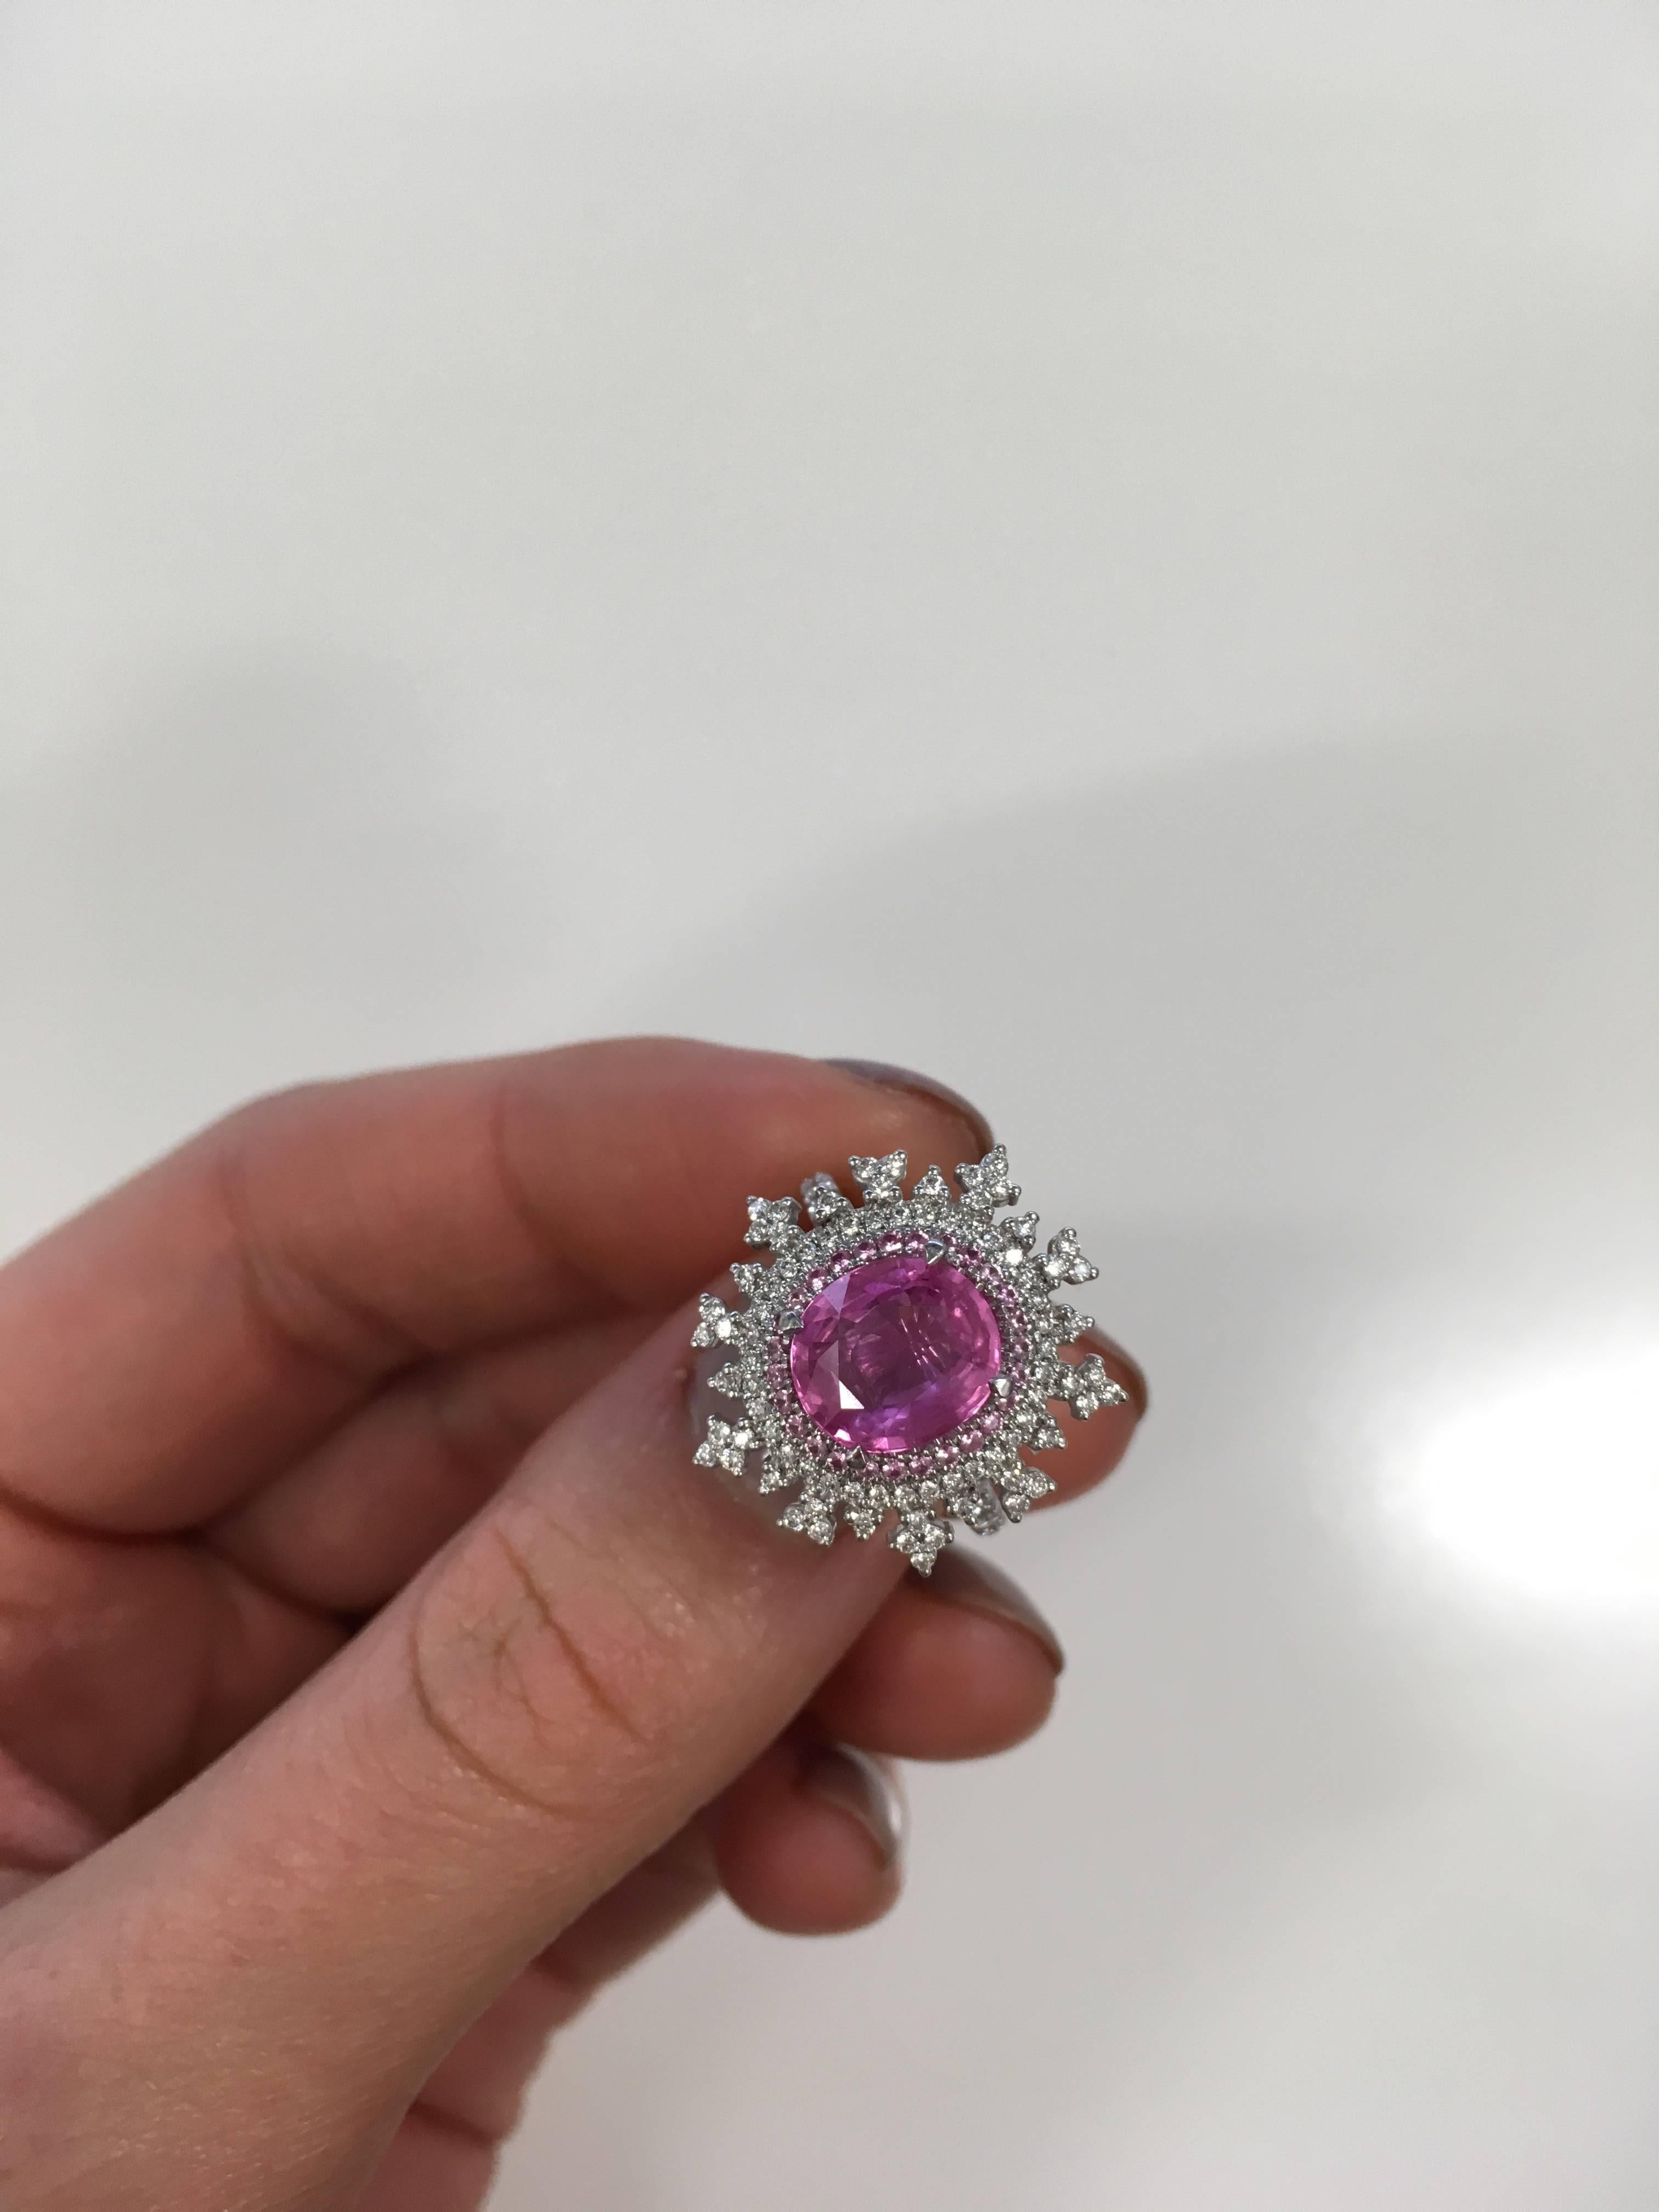 Nadine Aysoy 18Karat White Gold, Pink Sapphire and White Diamond Engagement Ring For Sale 2